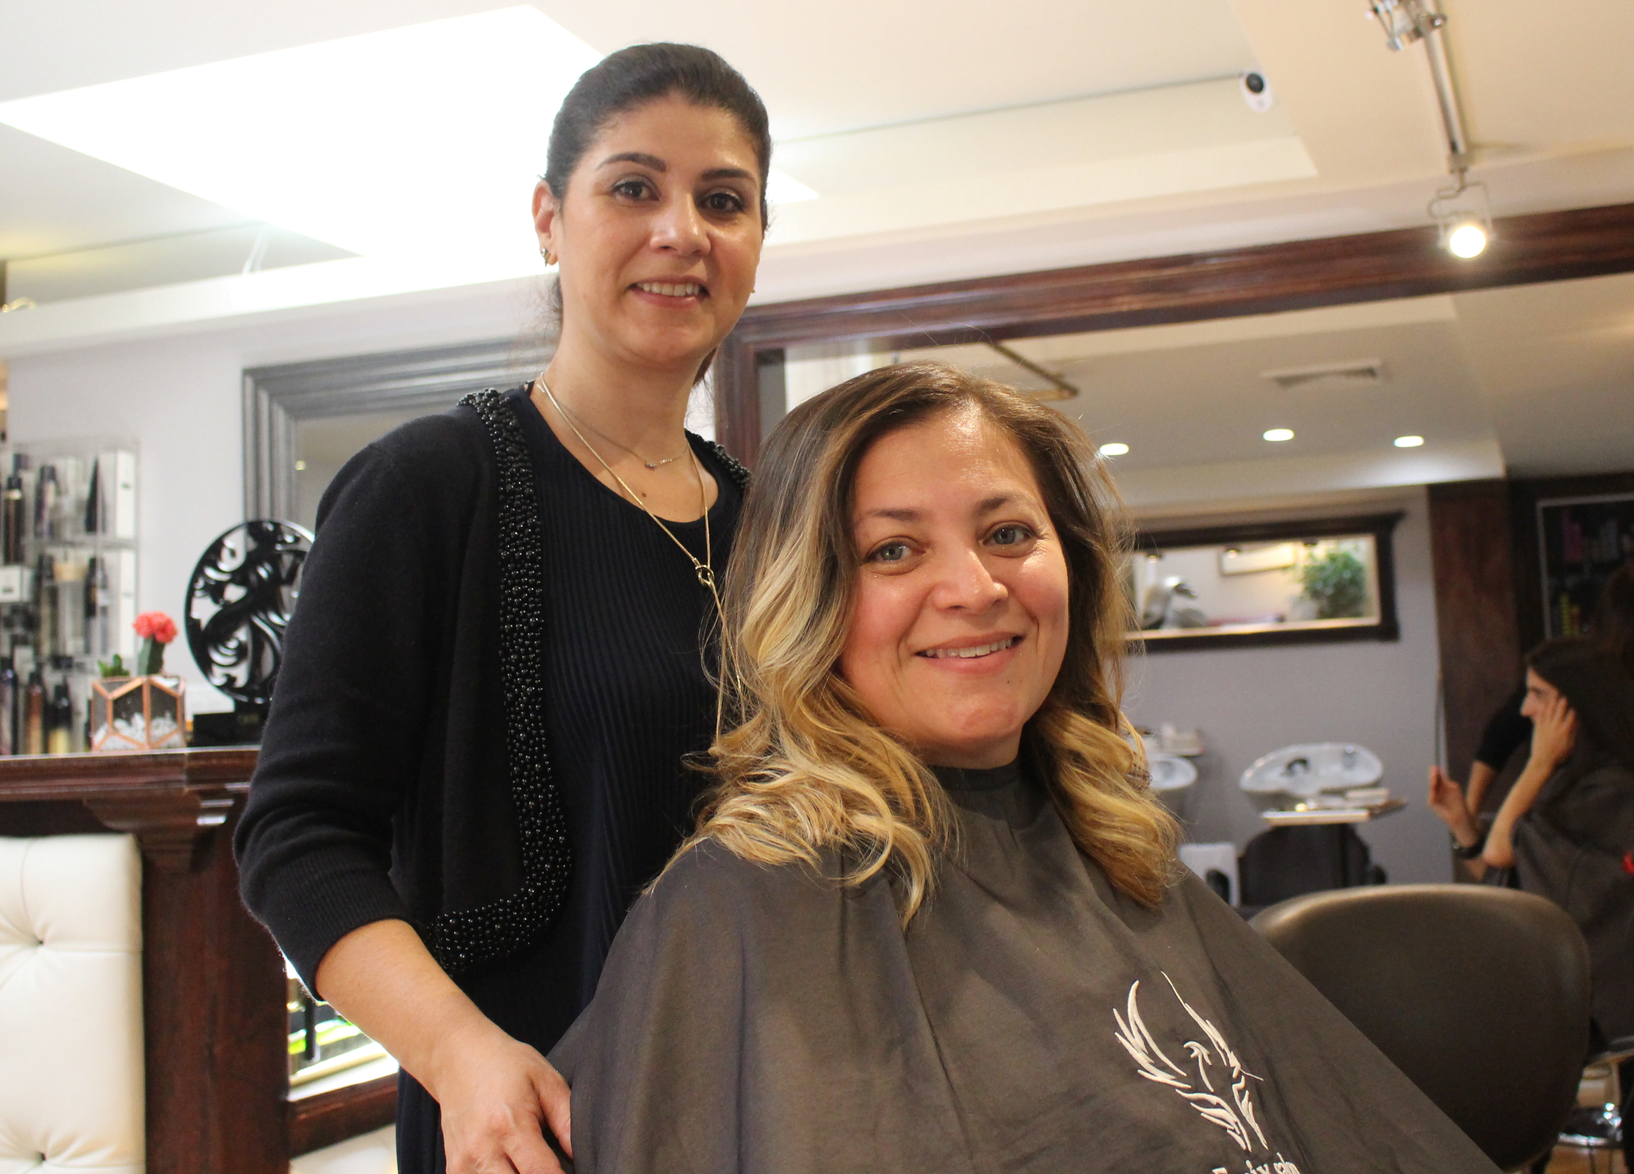 Maria Espinosa with her fashionable ombré at Fenix Salon. May 12, 2017 Photo: Leslie Yager